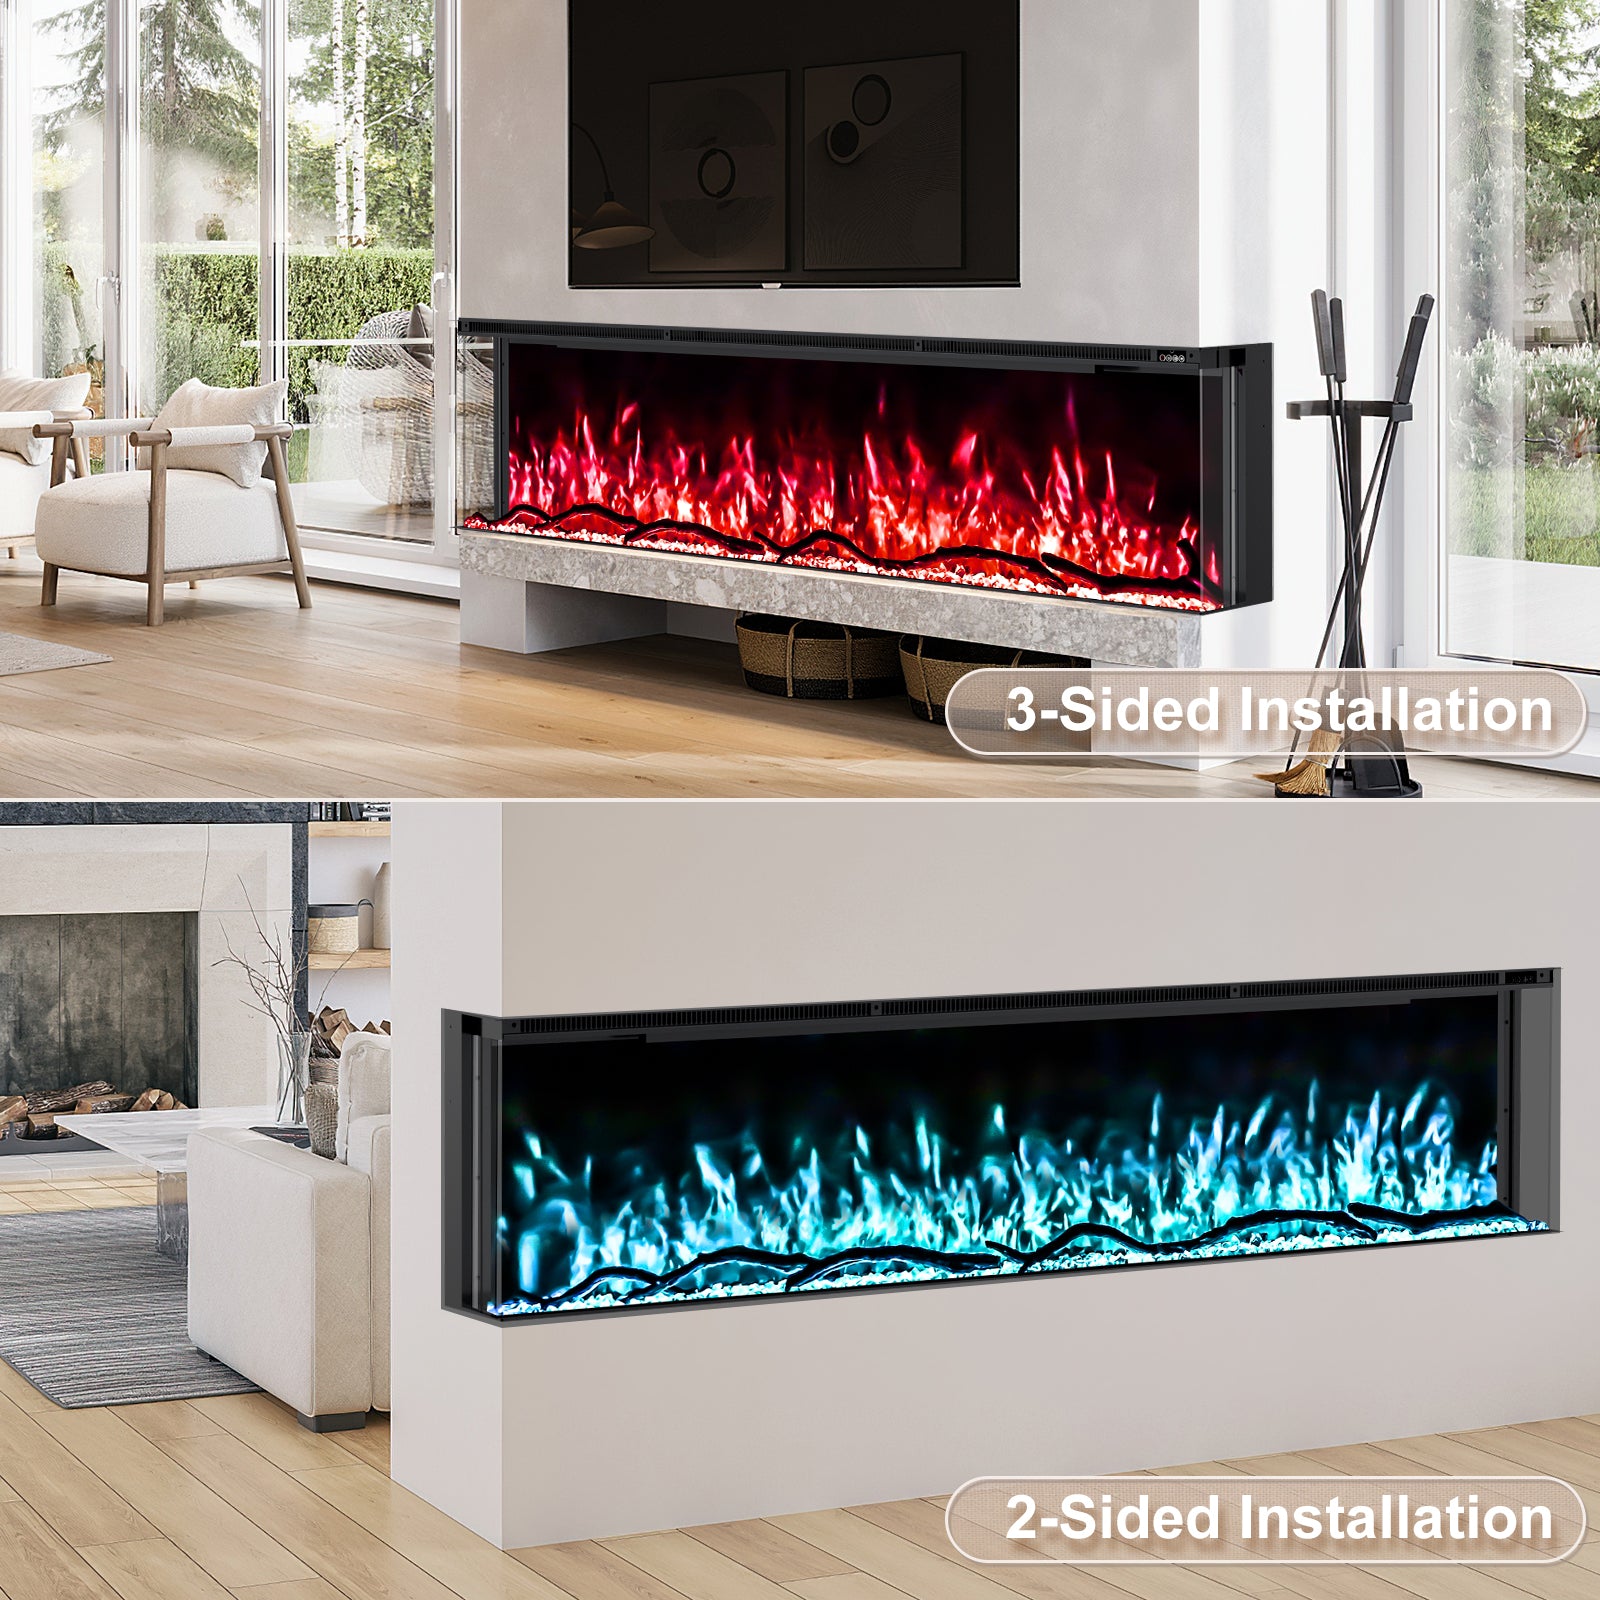 Inserts 3-Sided Electric Fireplace 50-inch Long Modern Eletric Fire Place Space Heater for Indoor Living Room Bedroom Use, Realistic Led Flame Color with Remote Control, Log & Crystals, Black